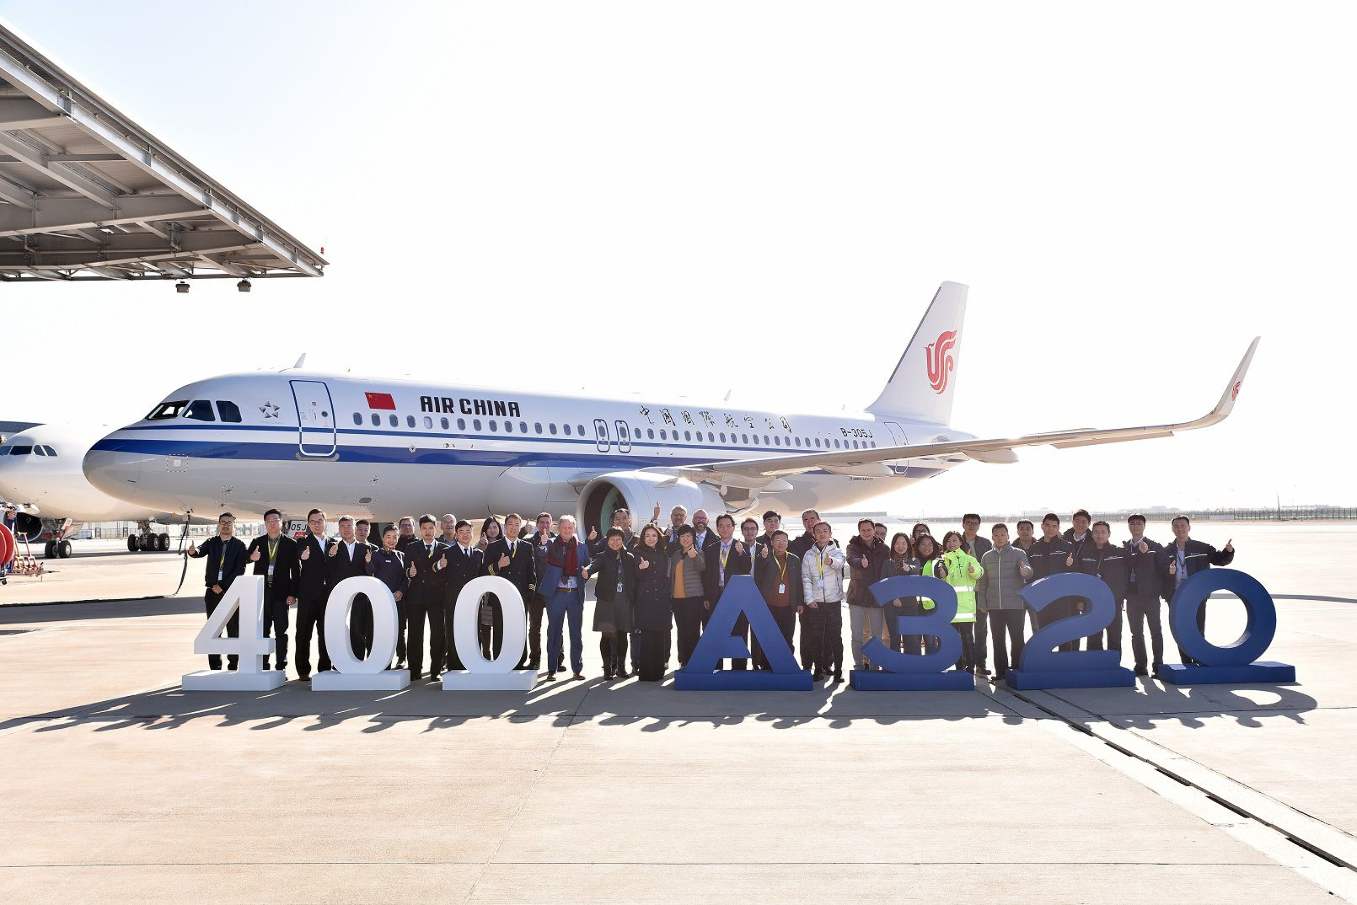 Airbus delivers 400th A320 from Tianjin